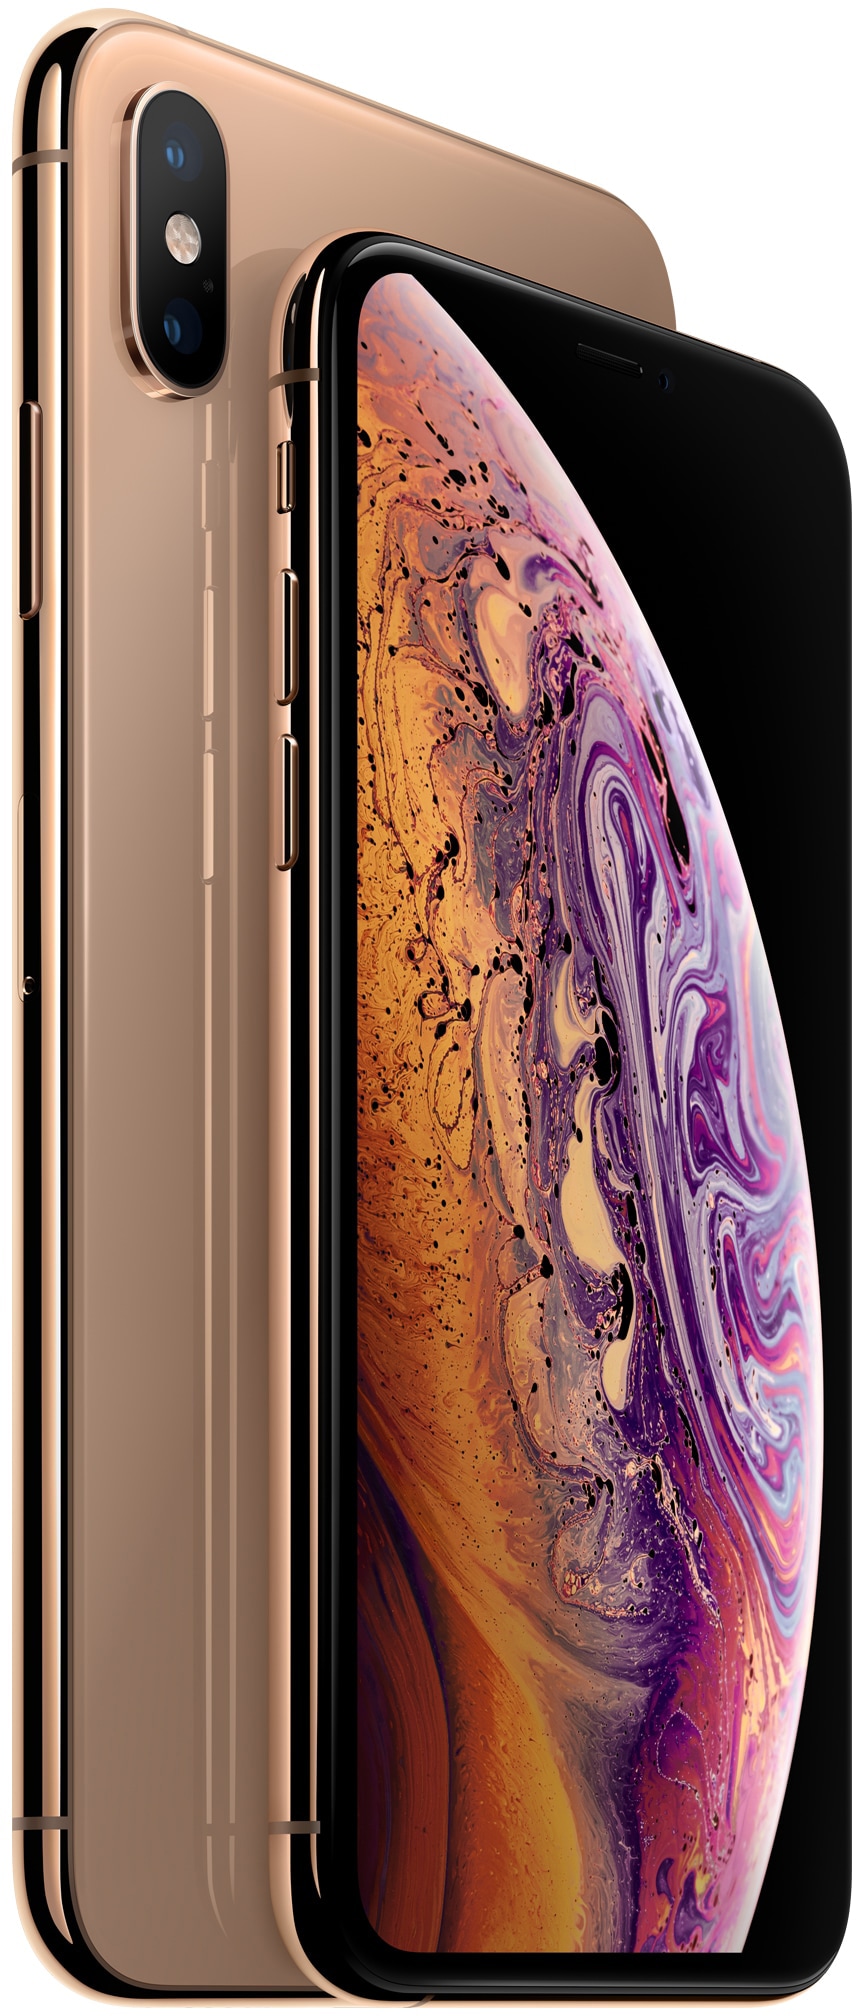 iPhone Xs and Xs Max in gold